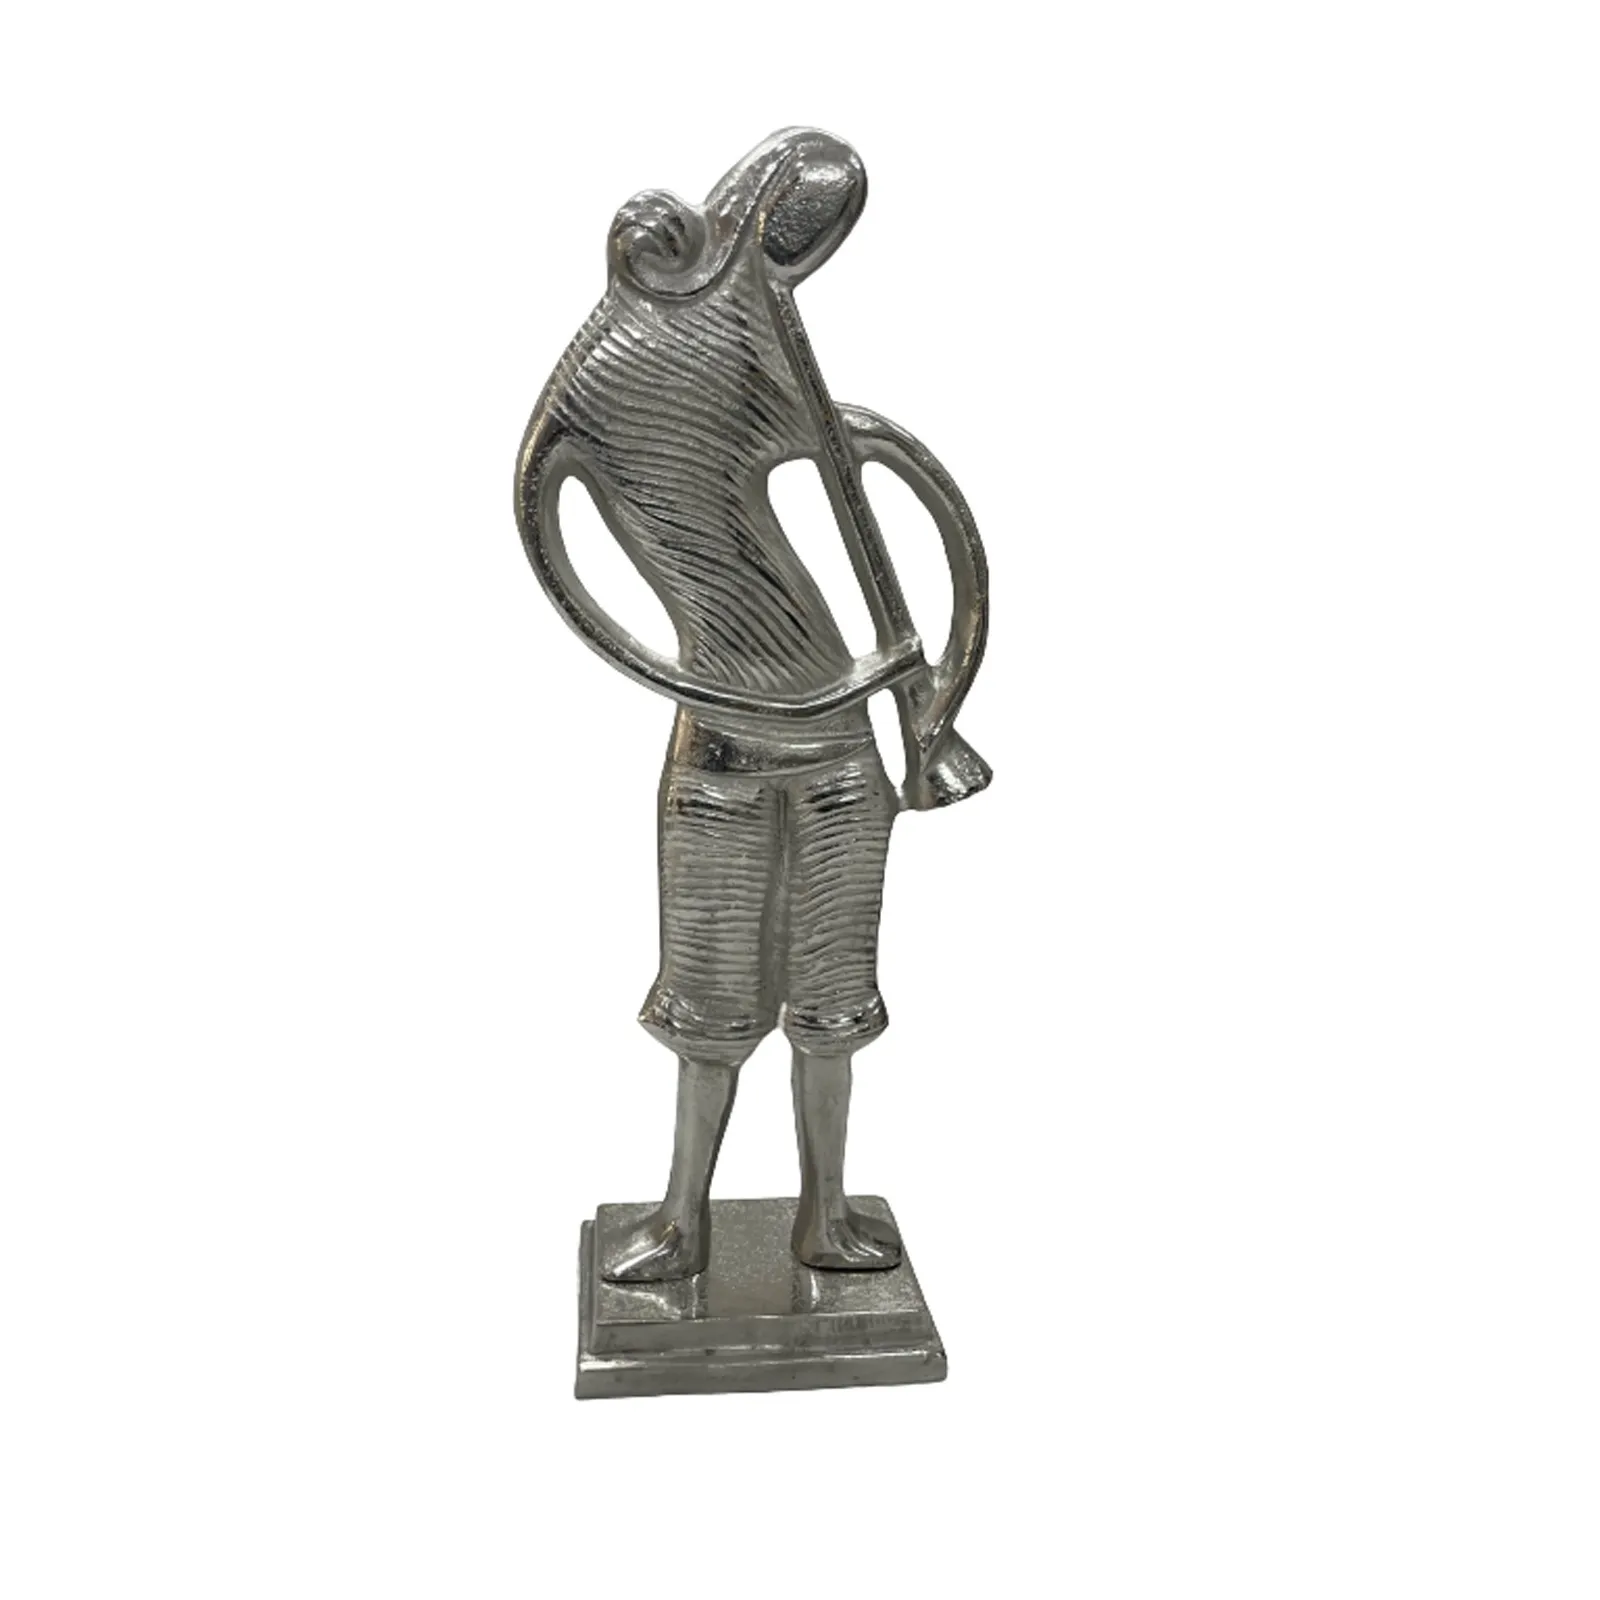 Art Dancing Sculpture Abstract Ornament Figurine Latest Selling Affectionate Art Sculpture Statue Export In India